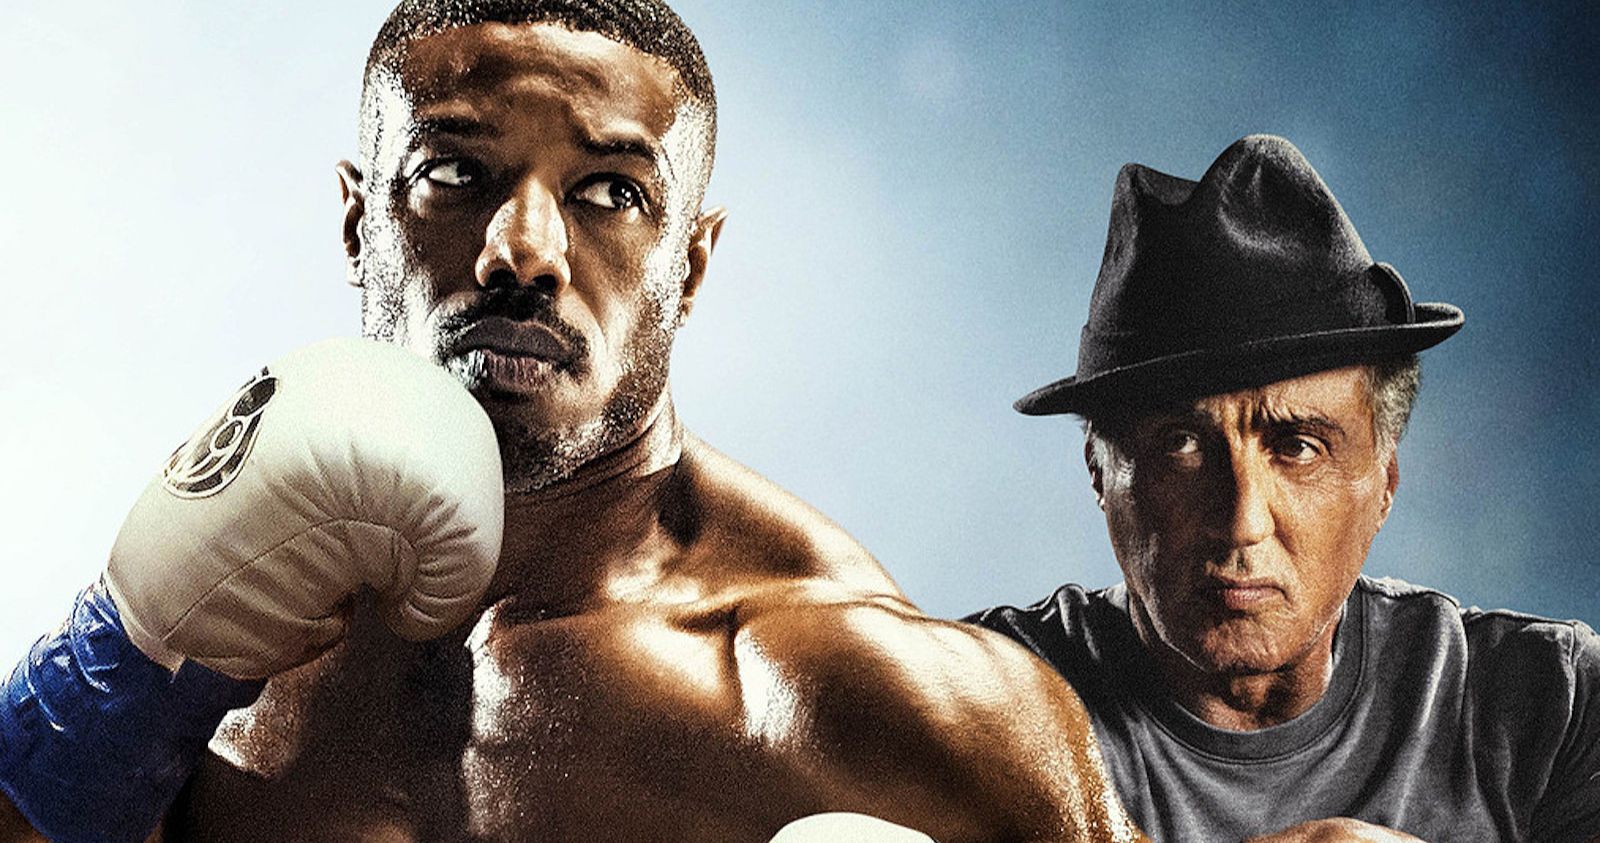 Why Sylvester Stallone's Rocky Won't Return in Creed III According to Michael B. Jordan